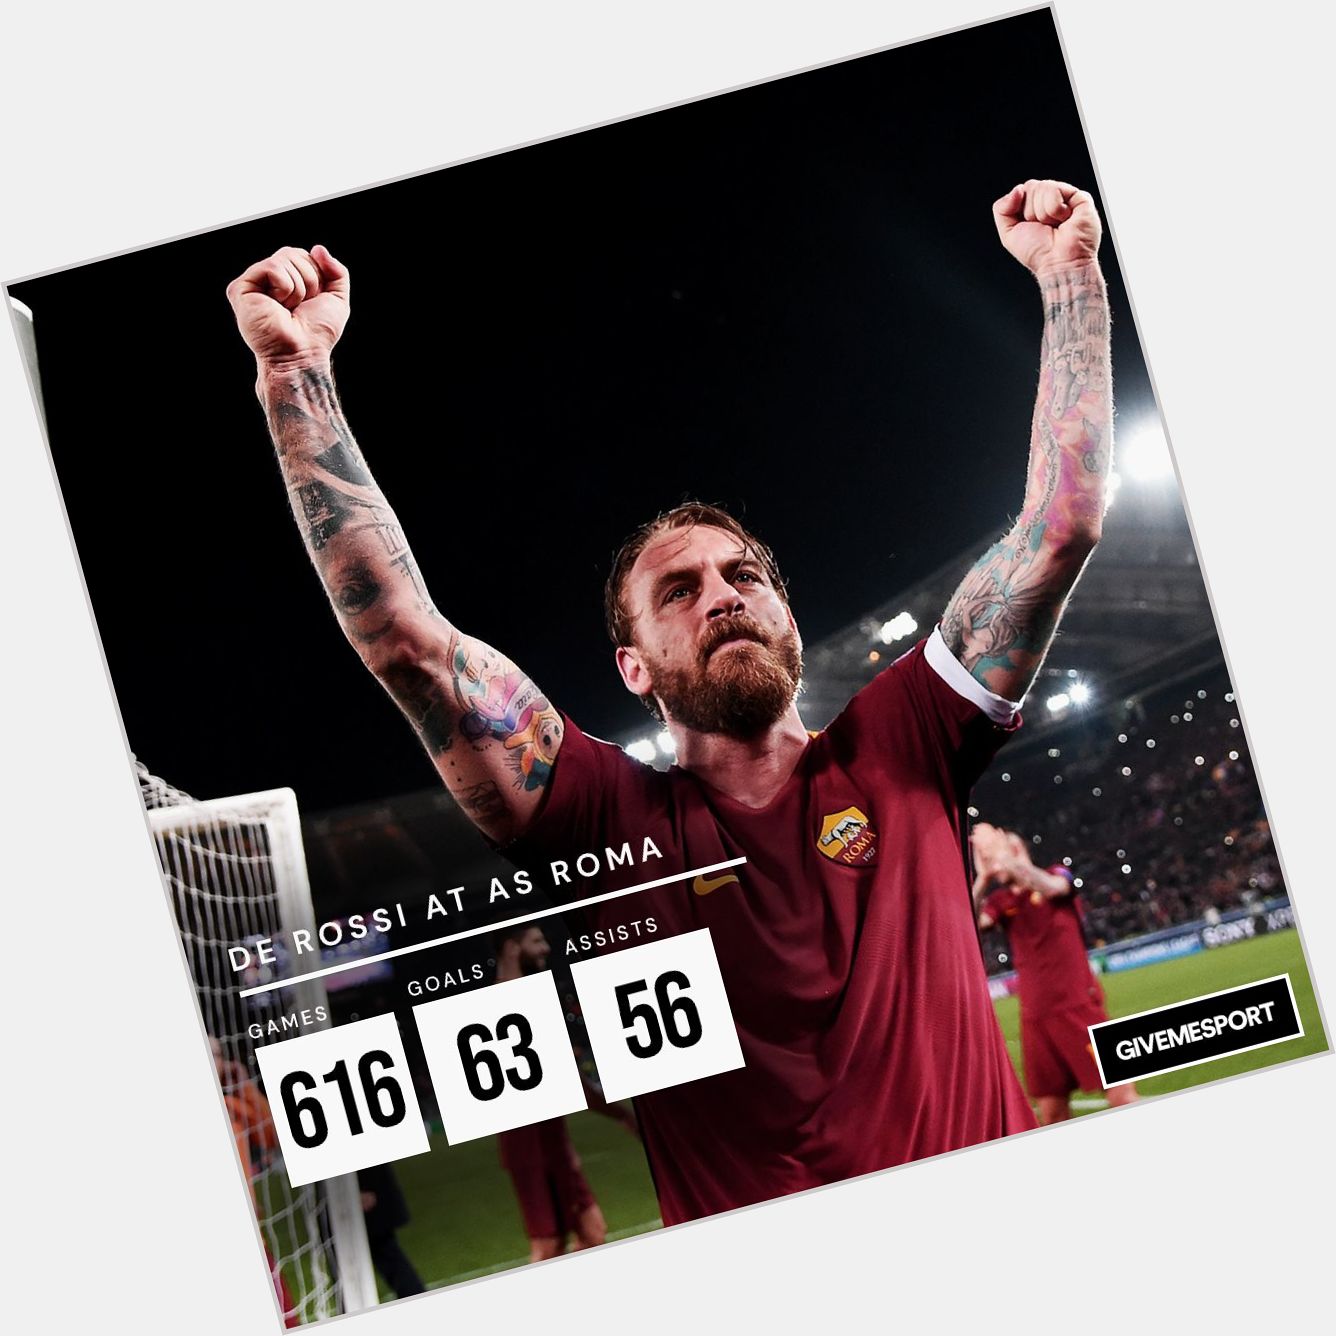 A man who is forever idolised at   Happy 3  7  th birthday, Daniele De Rossi   